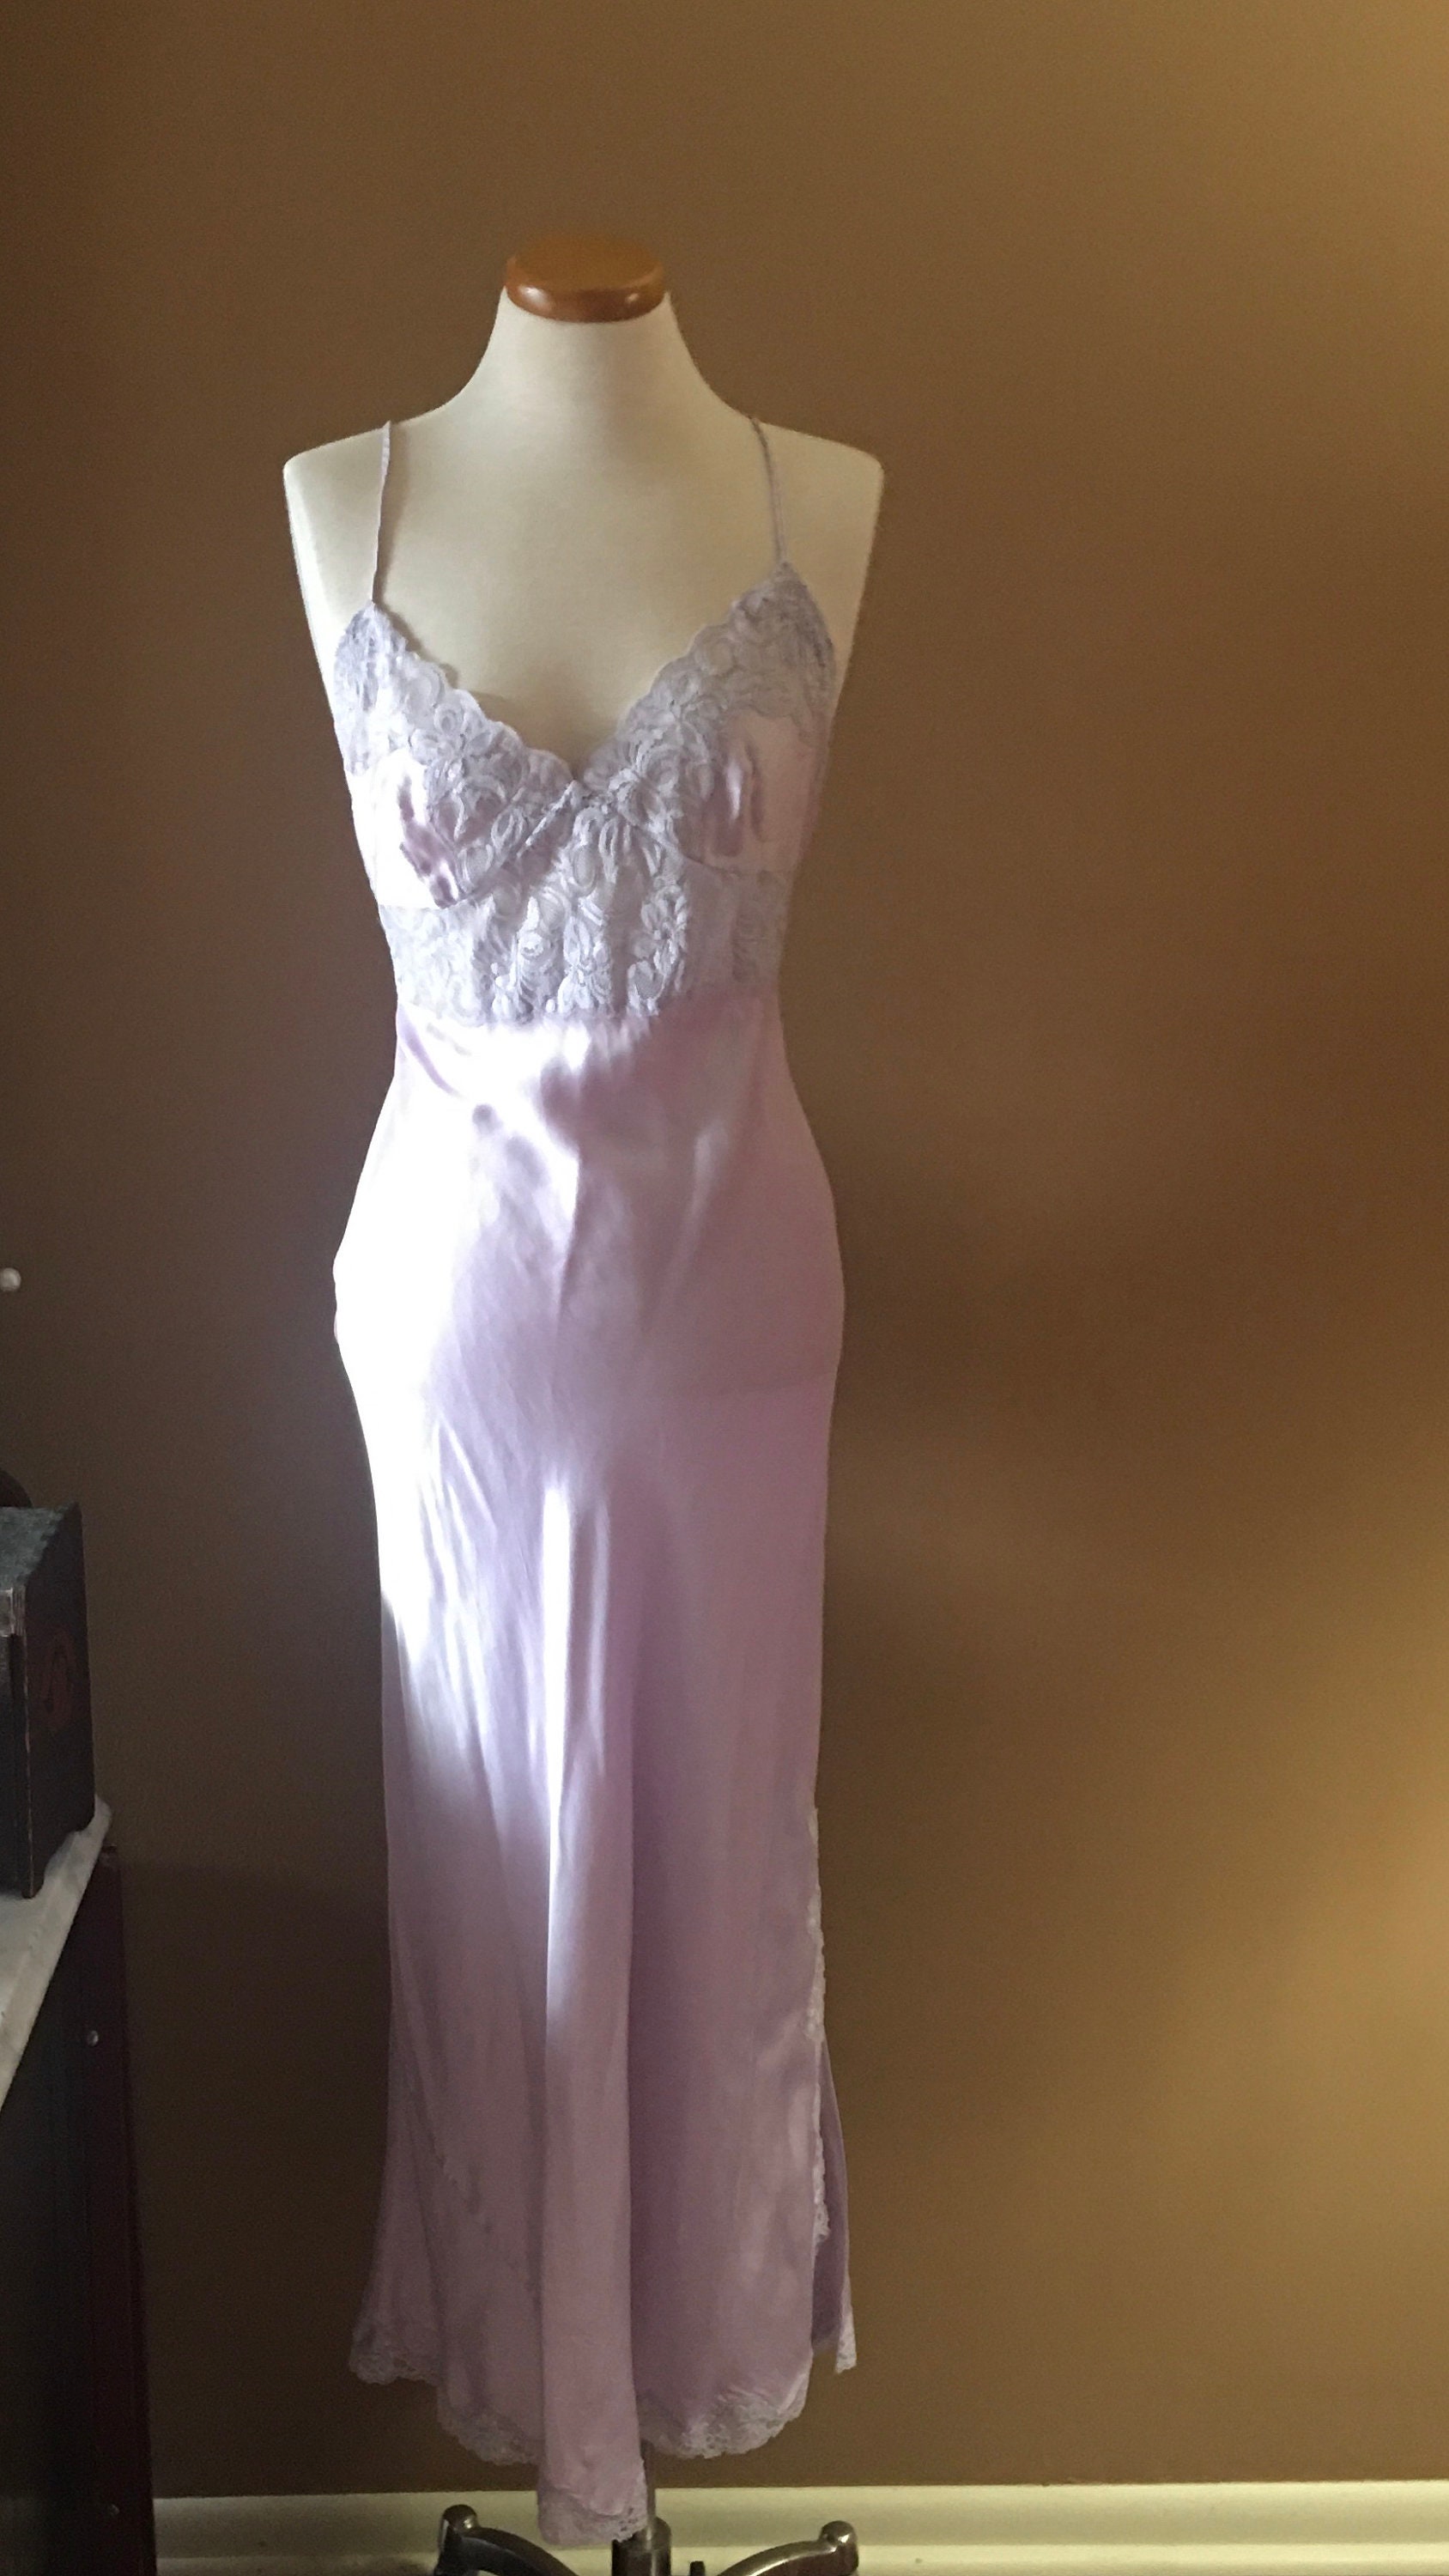 Willow Blossom Dusty Lilac Gown Lingerie Negligee Size 